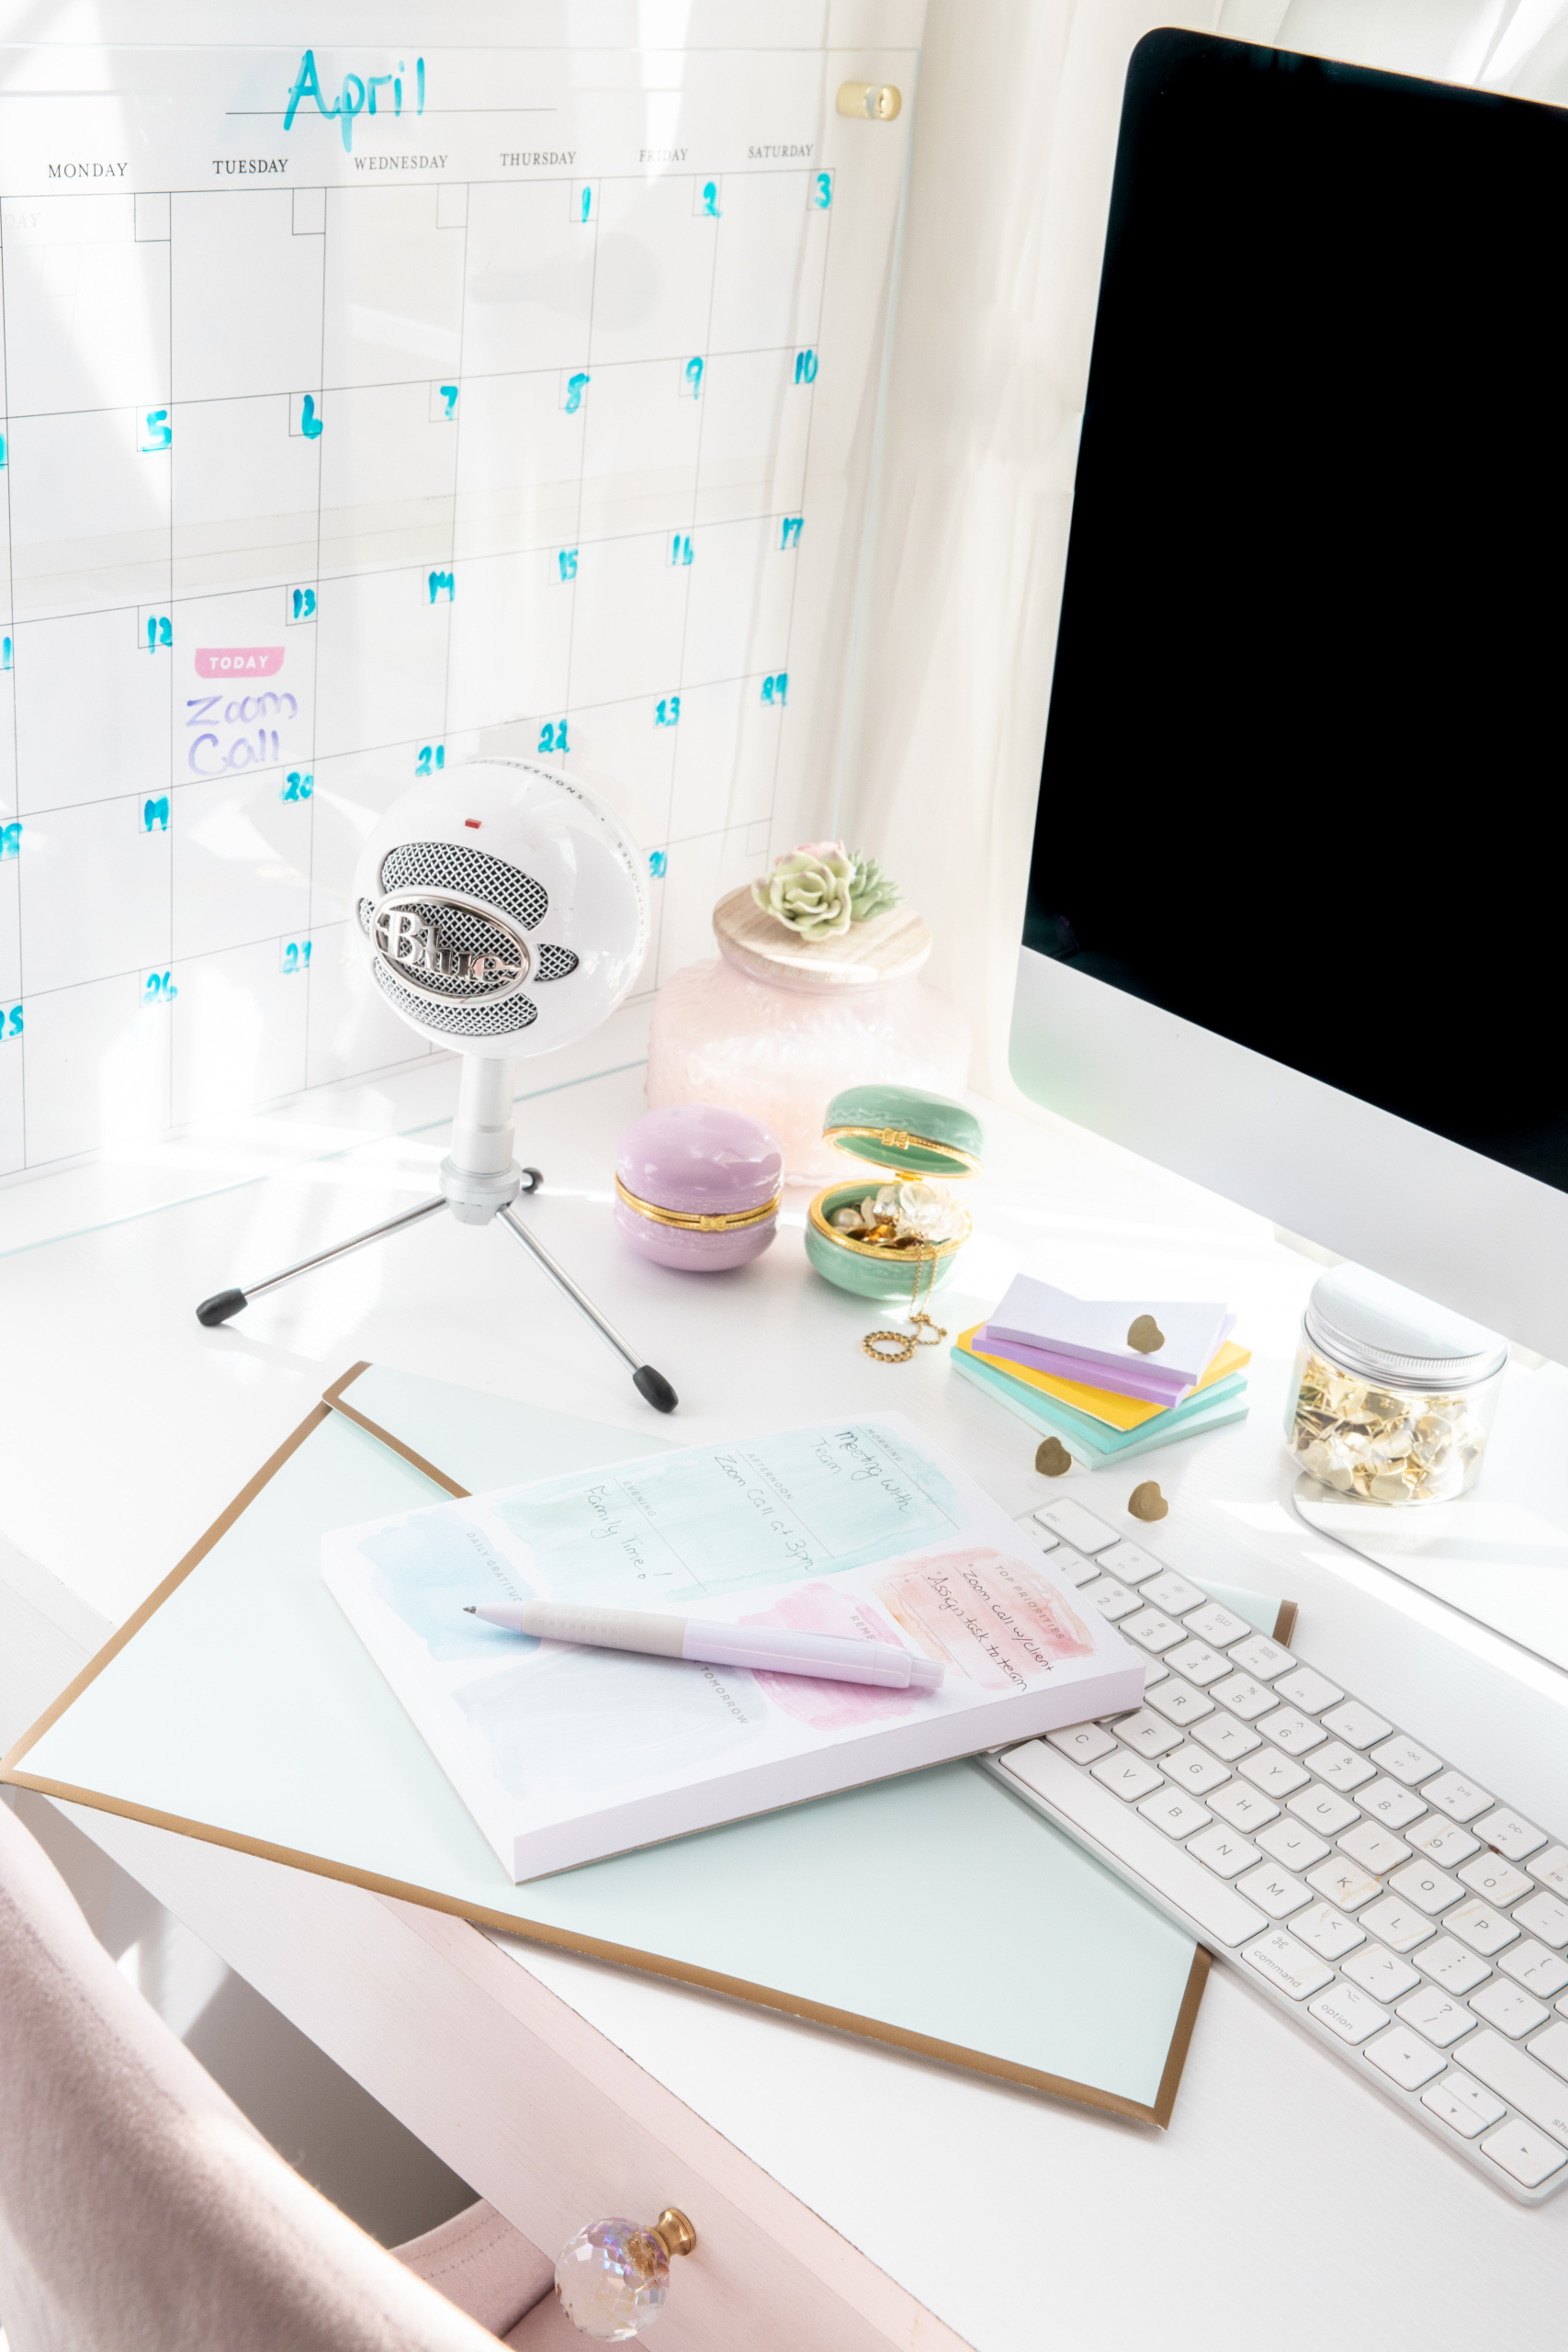 5 Things New Bloggers Should Do Every Day